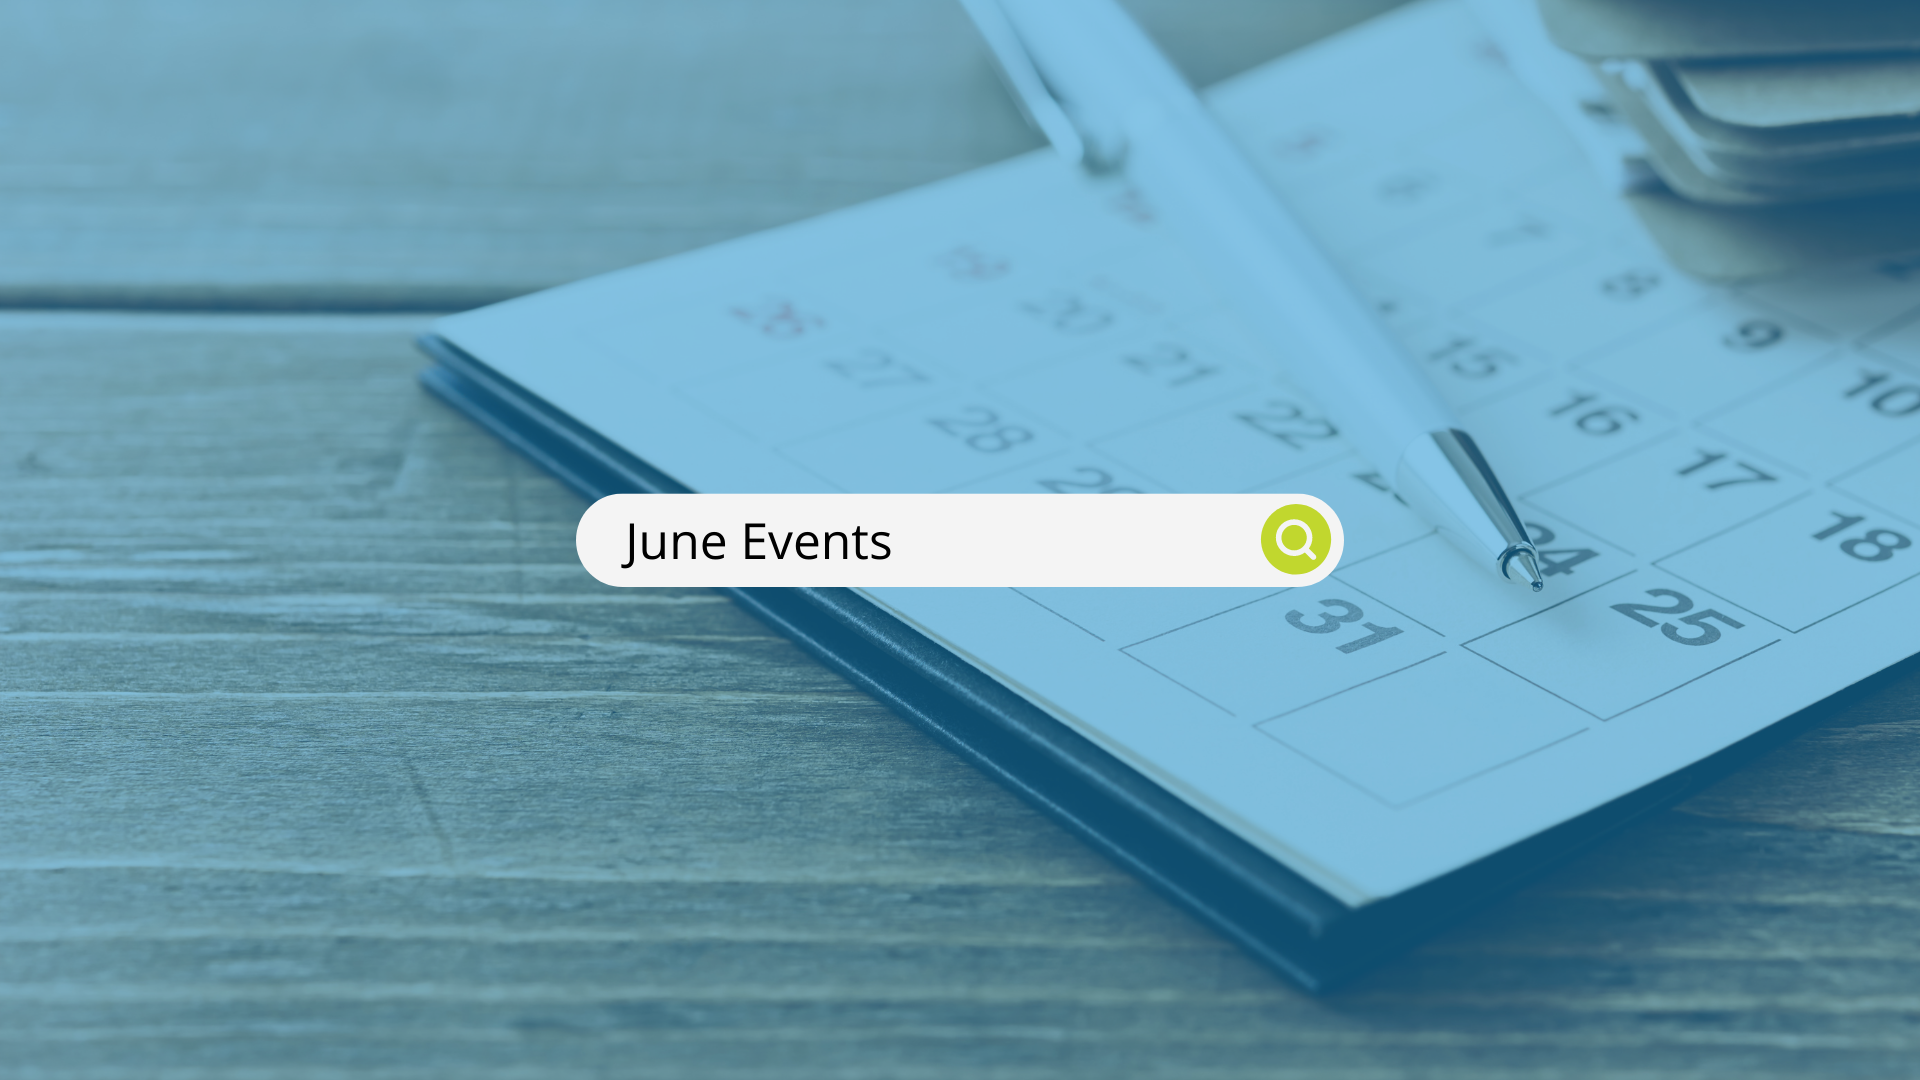 June Events search bar with Calendar and pen in the background